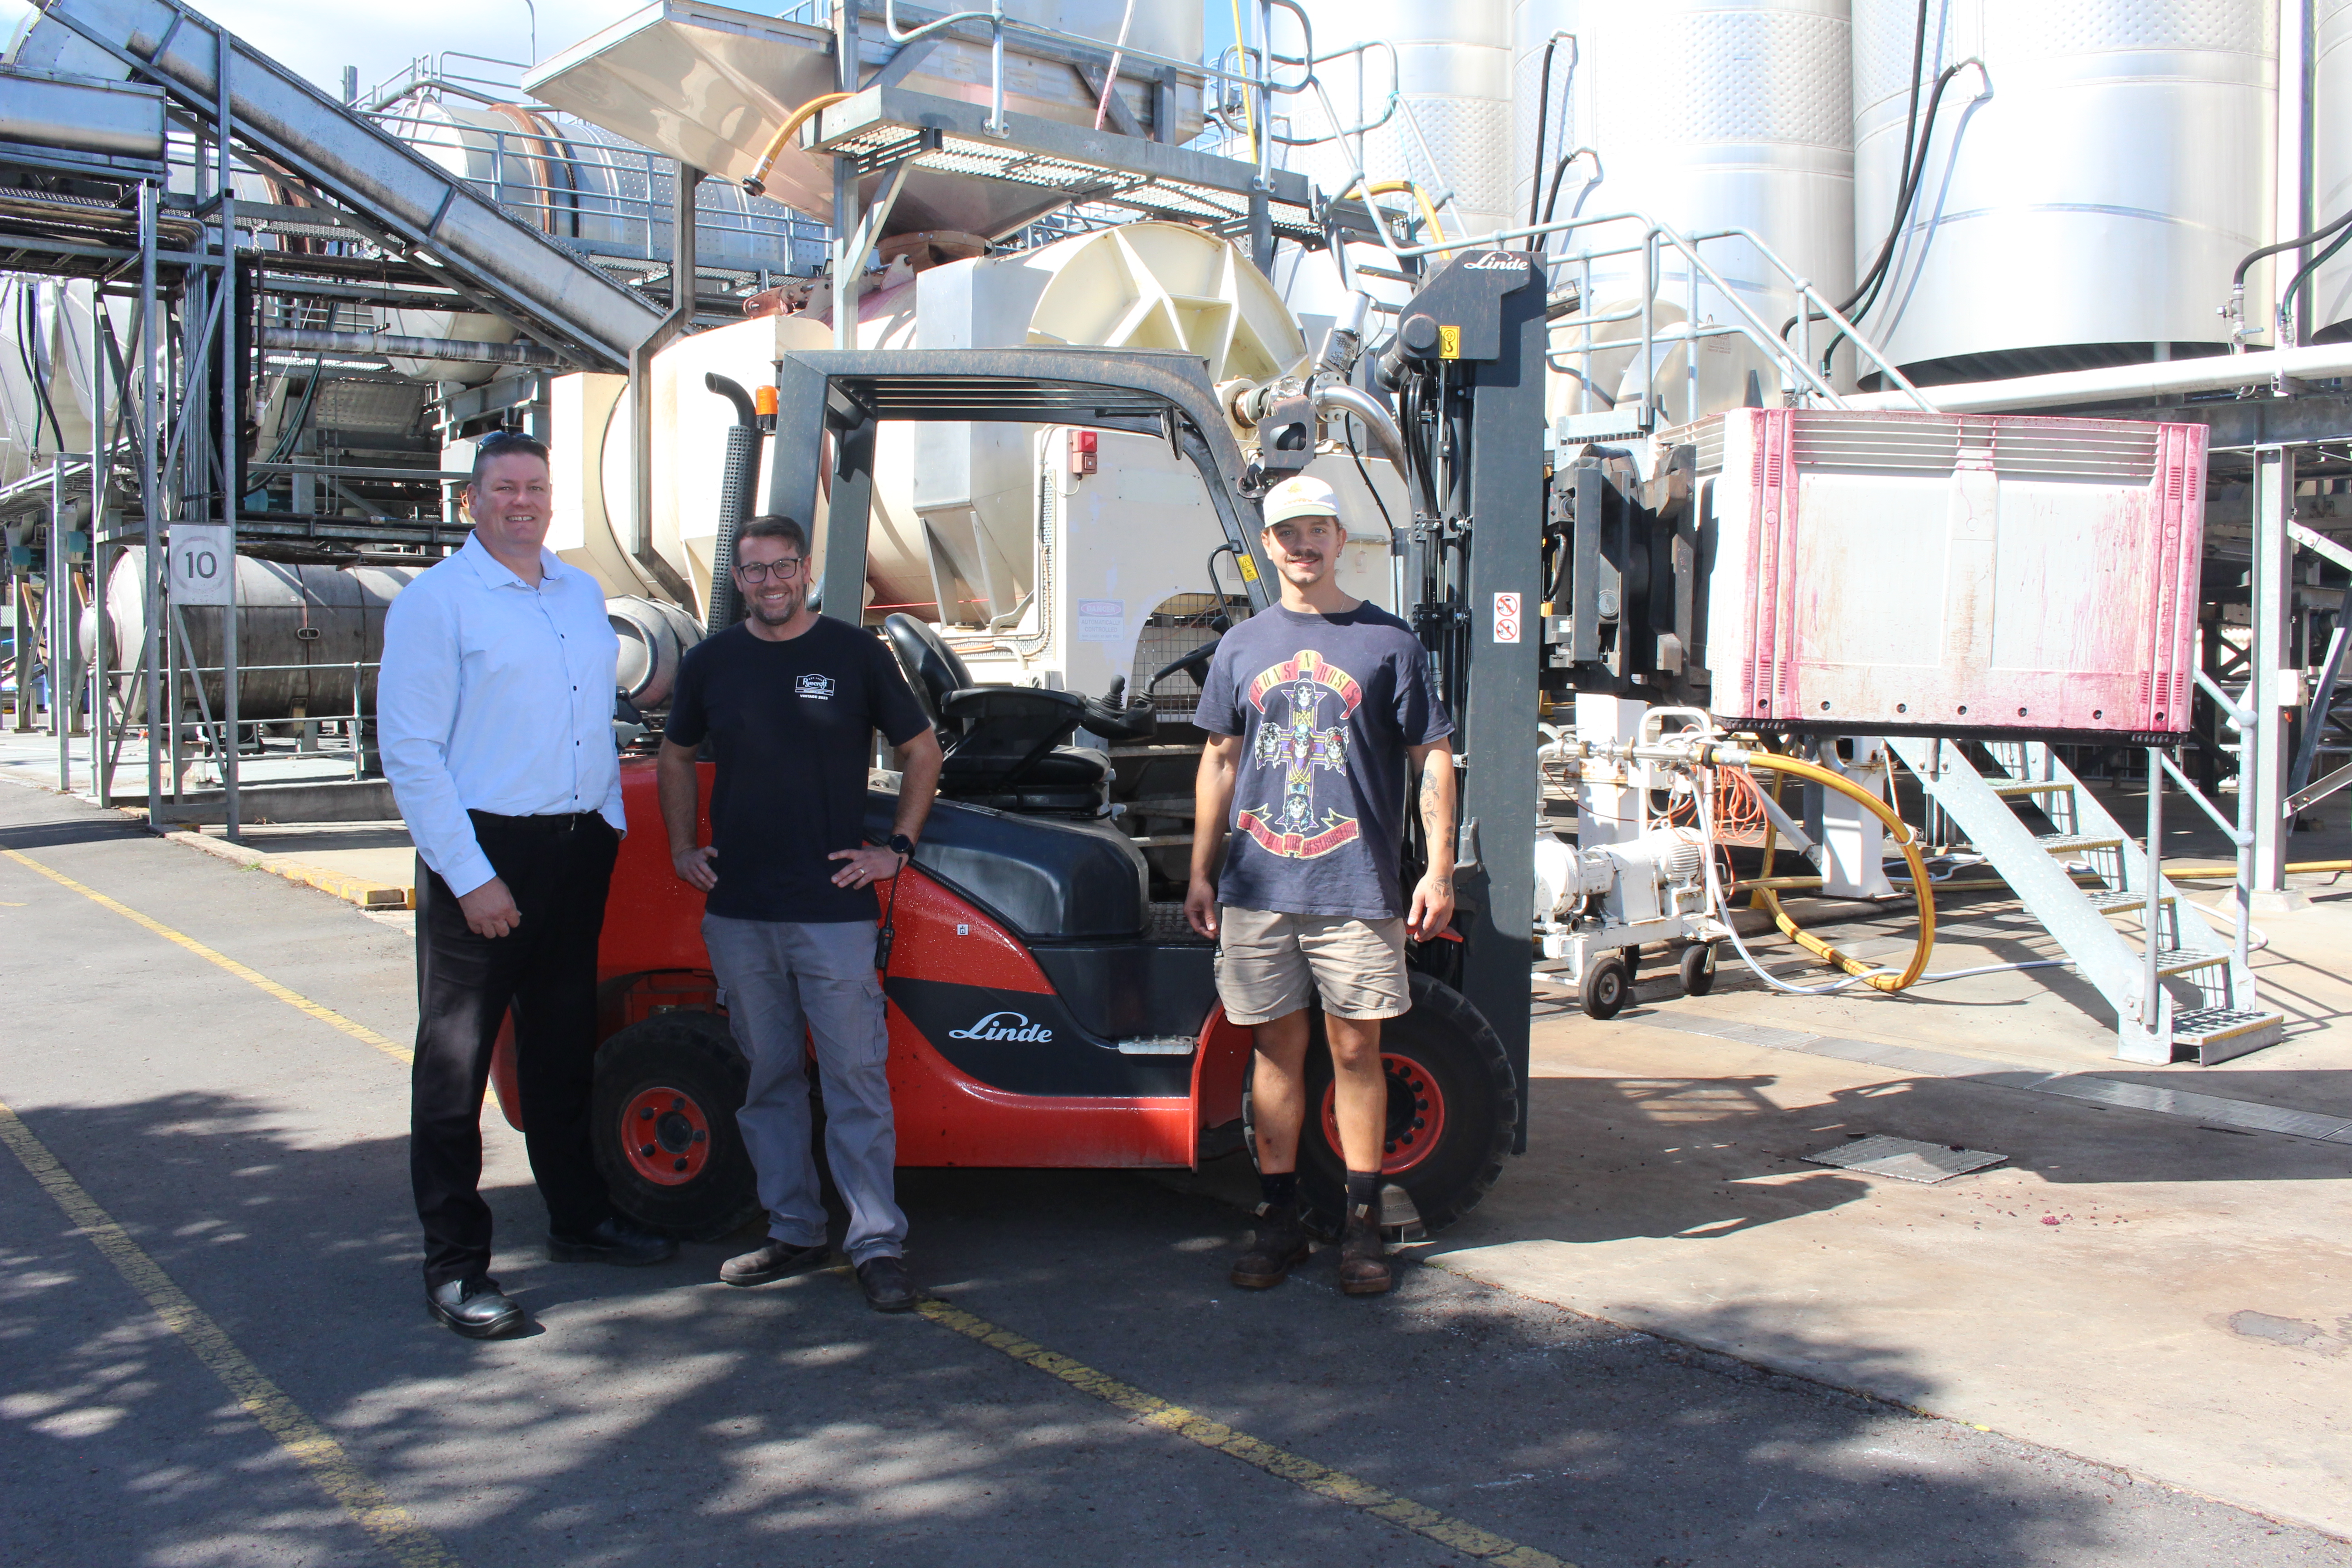 Linde Wine Industry Specialist with Ryecroft Manager and forklift operator in front of red Linde forklift on winery